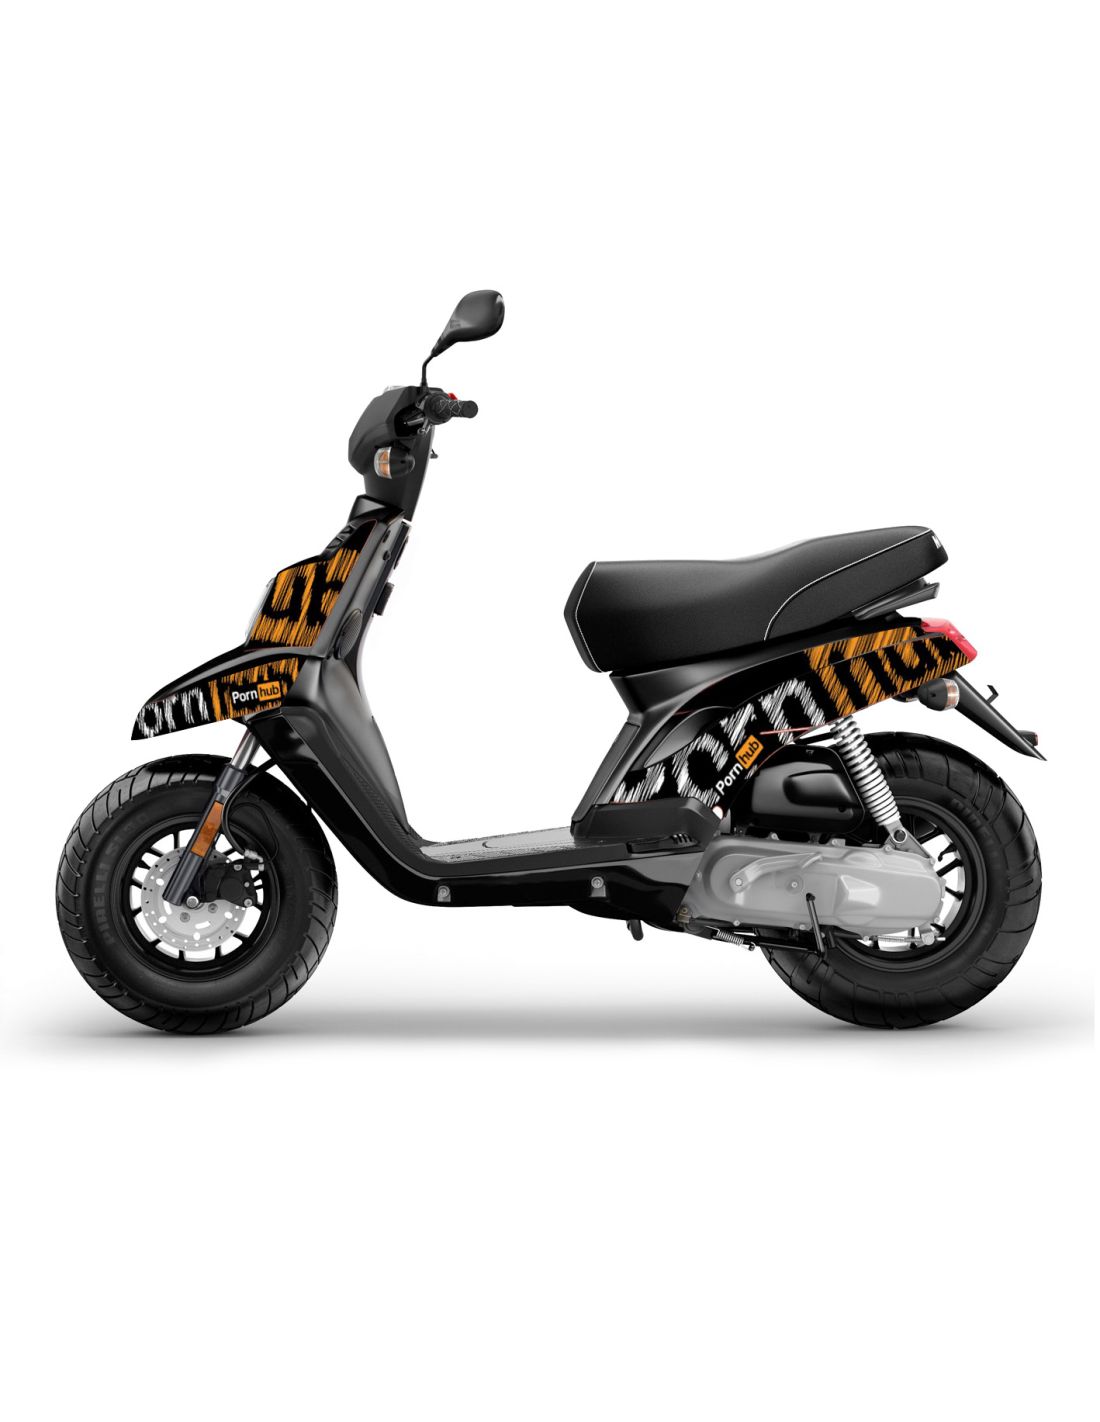 Scooter neuf MBK BOOSTER ONE 50cc. - L'atelier du scoot - L'atelier du scoot